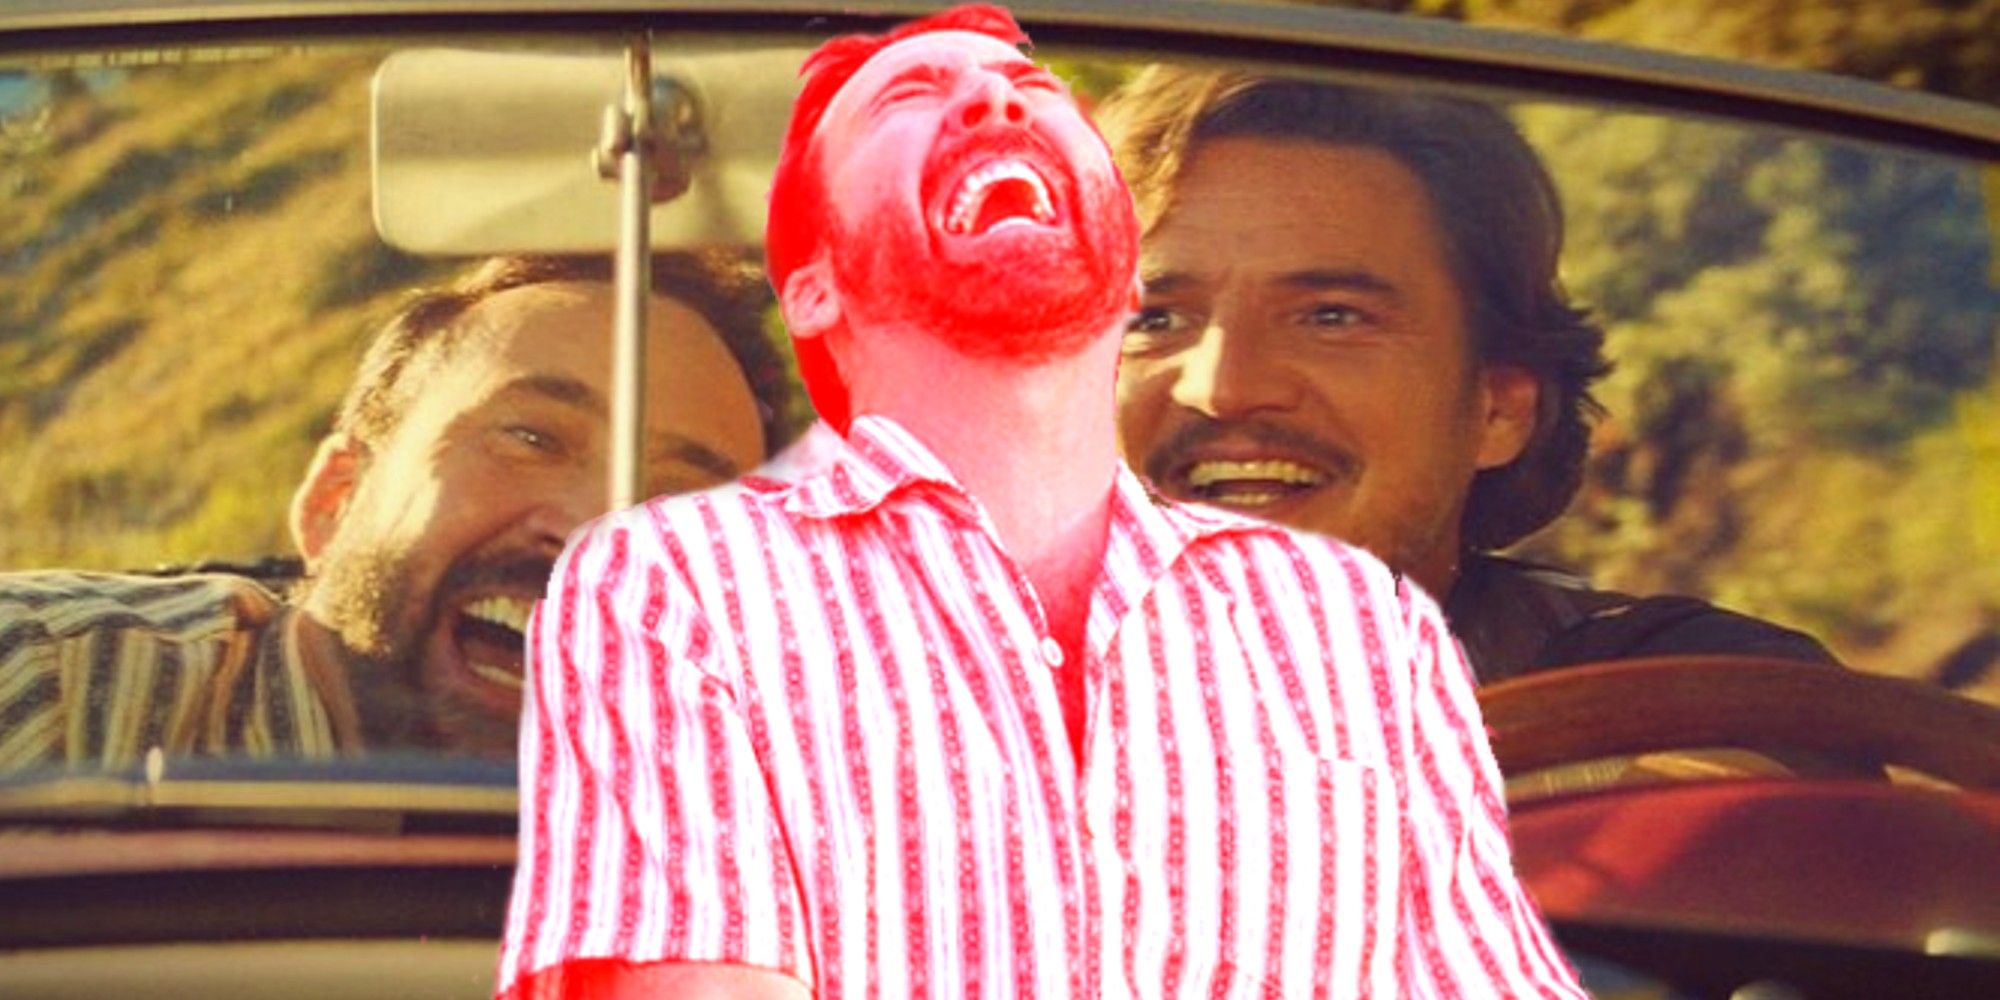 A collage of Nicolas Cage and Pedro Pascal laughing in The Unbearable Weight of Massive Talent